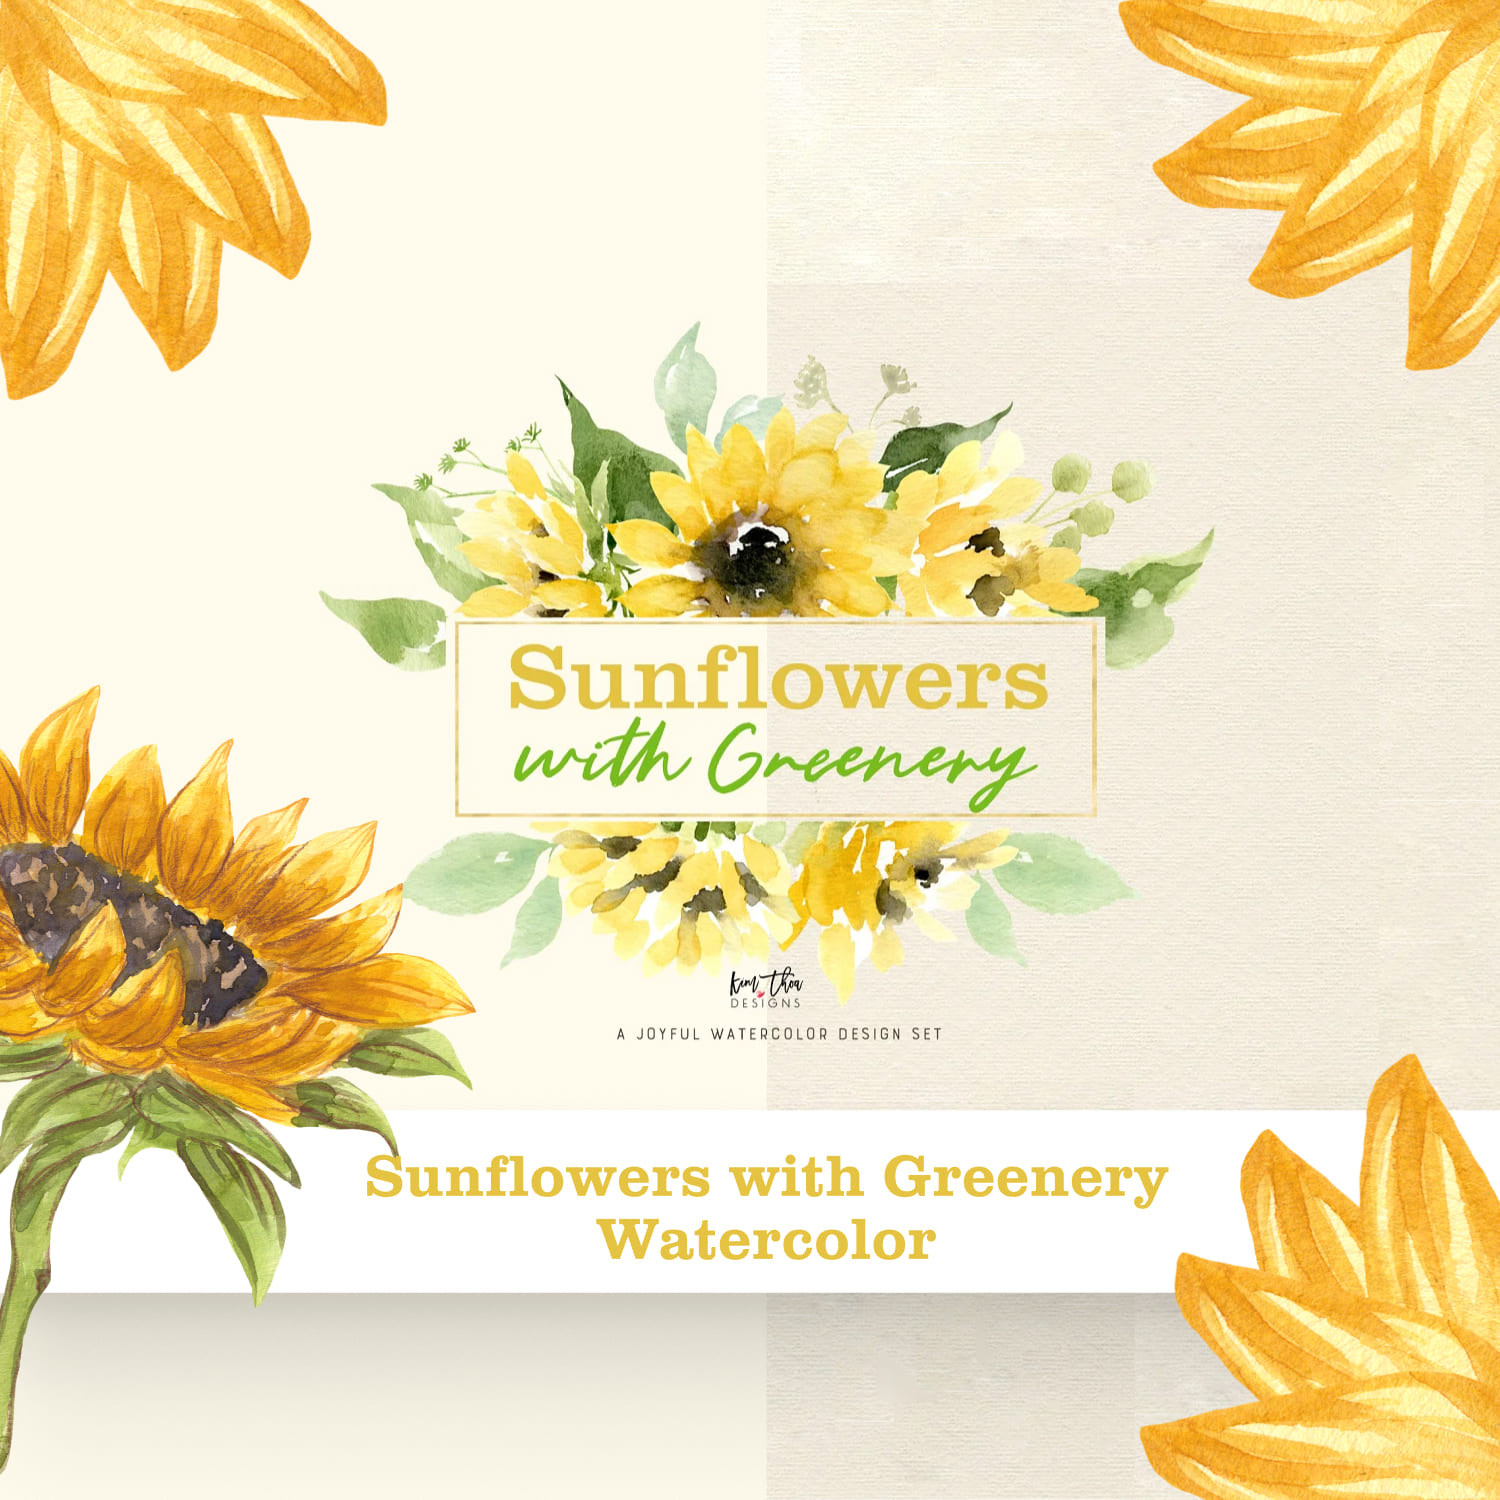 Sunflowers with Greenery Watercolor.